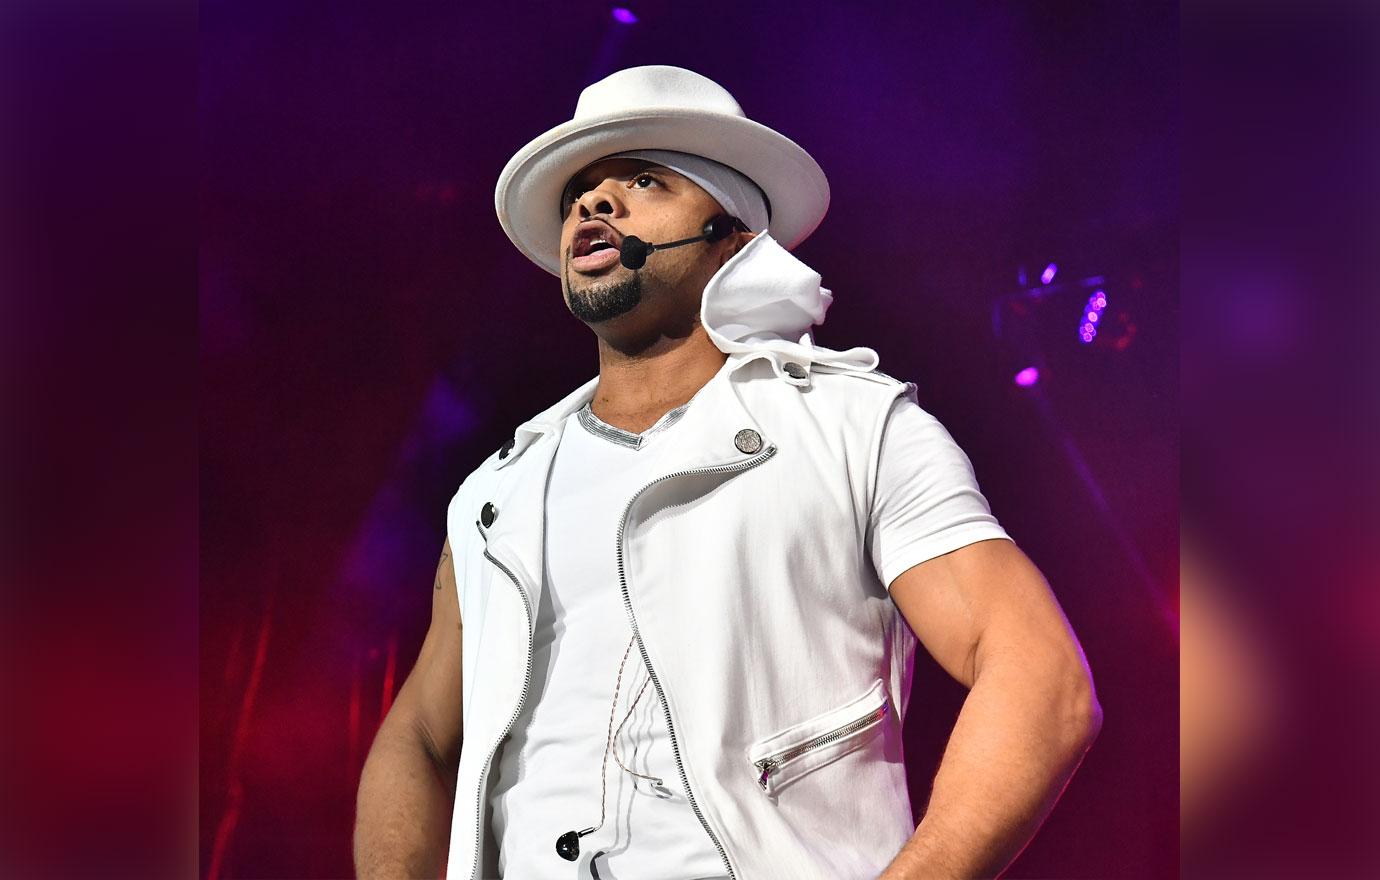 B2k Member Raz B Arrested For Domestic Violence Without Bail